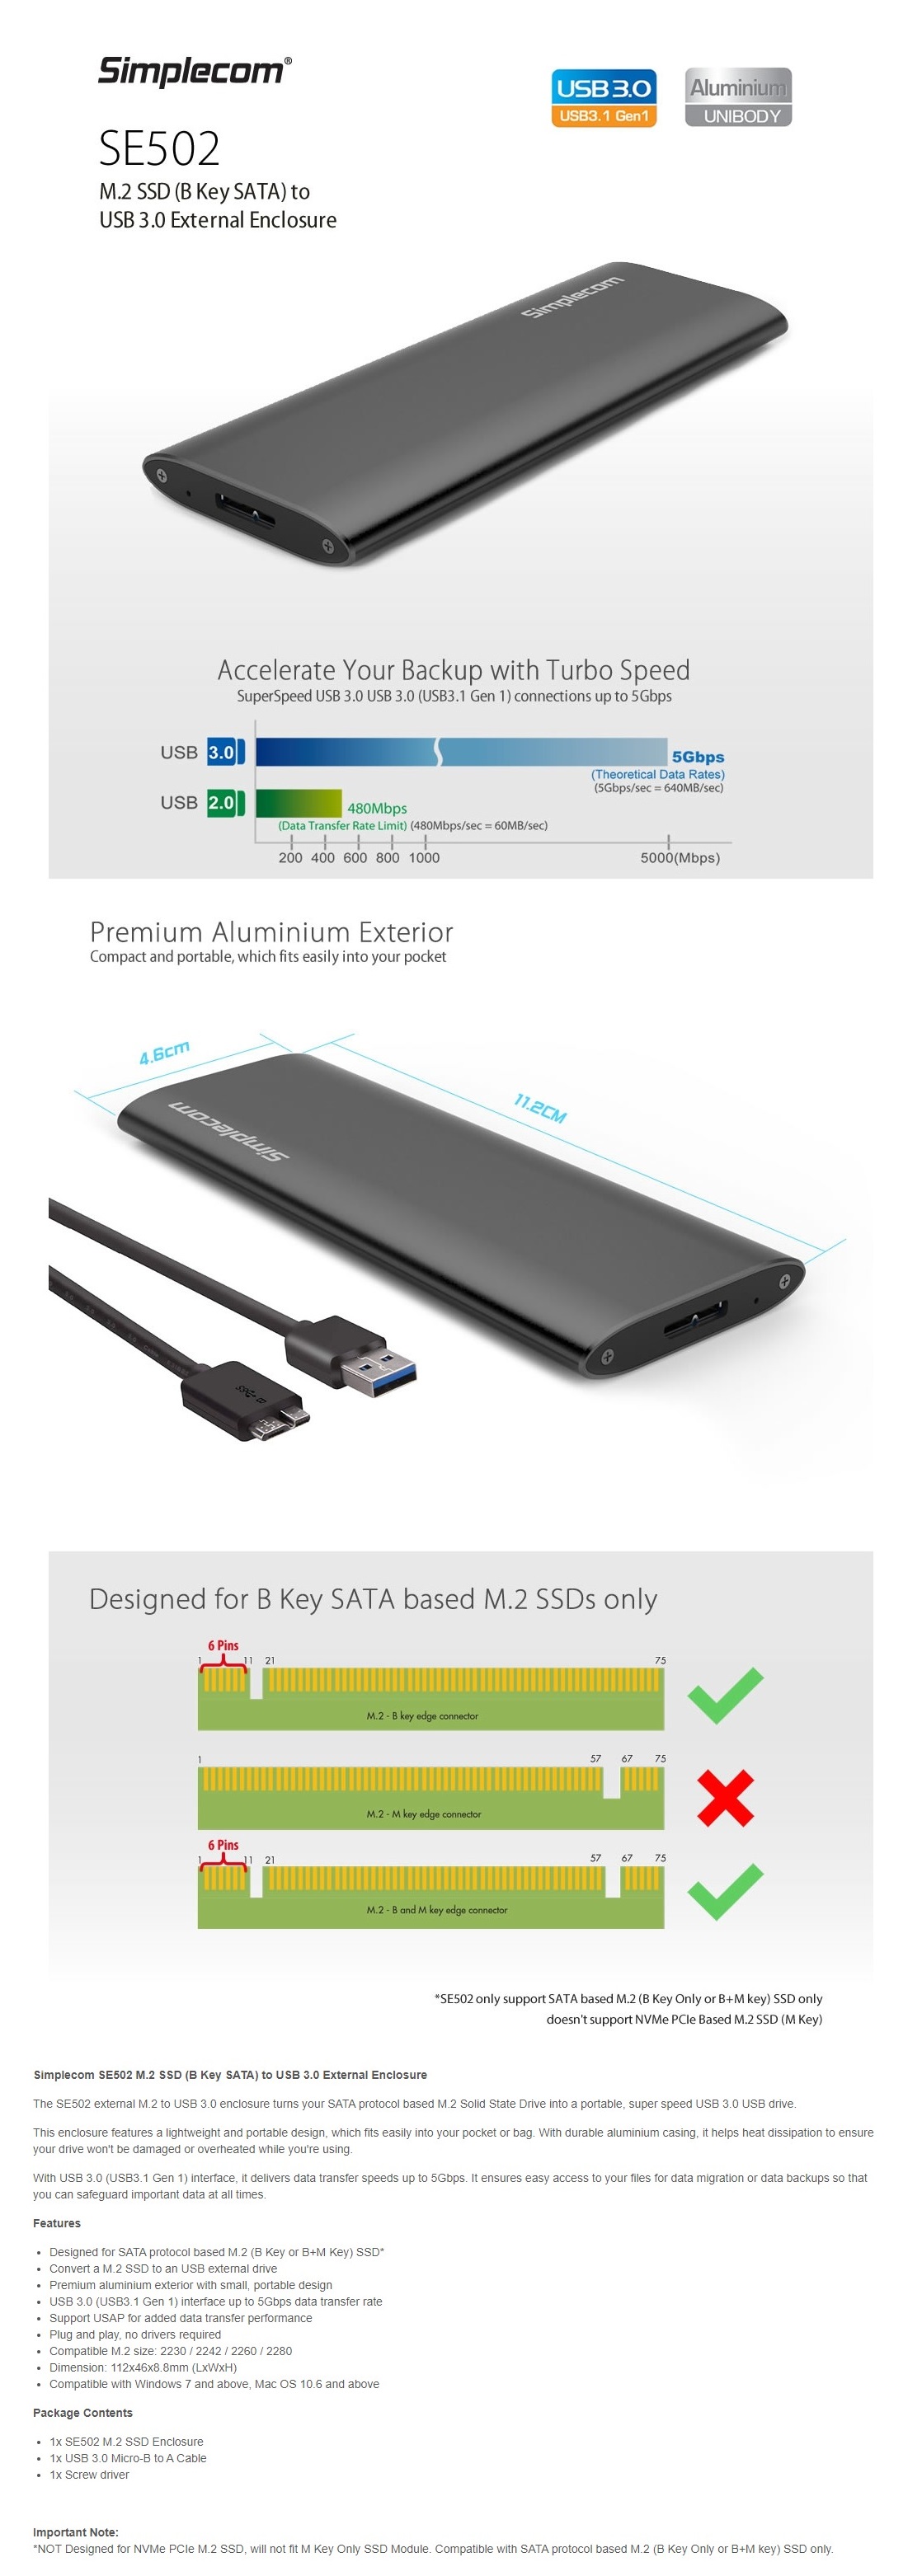 A large marketing image providing additional information about the product Simplecom SE502 M.2 B Key SATA to USB 3.0 External SSD Enclosure - Additional alt info not provided